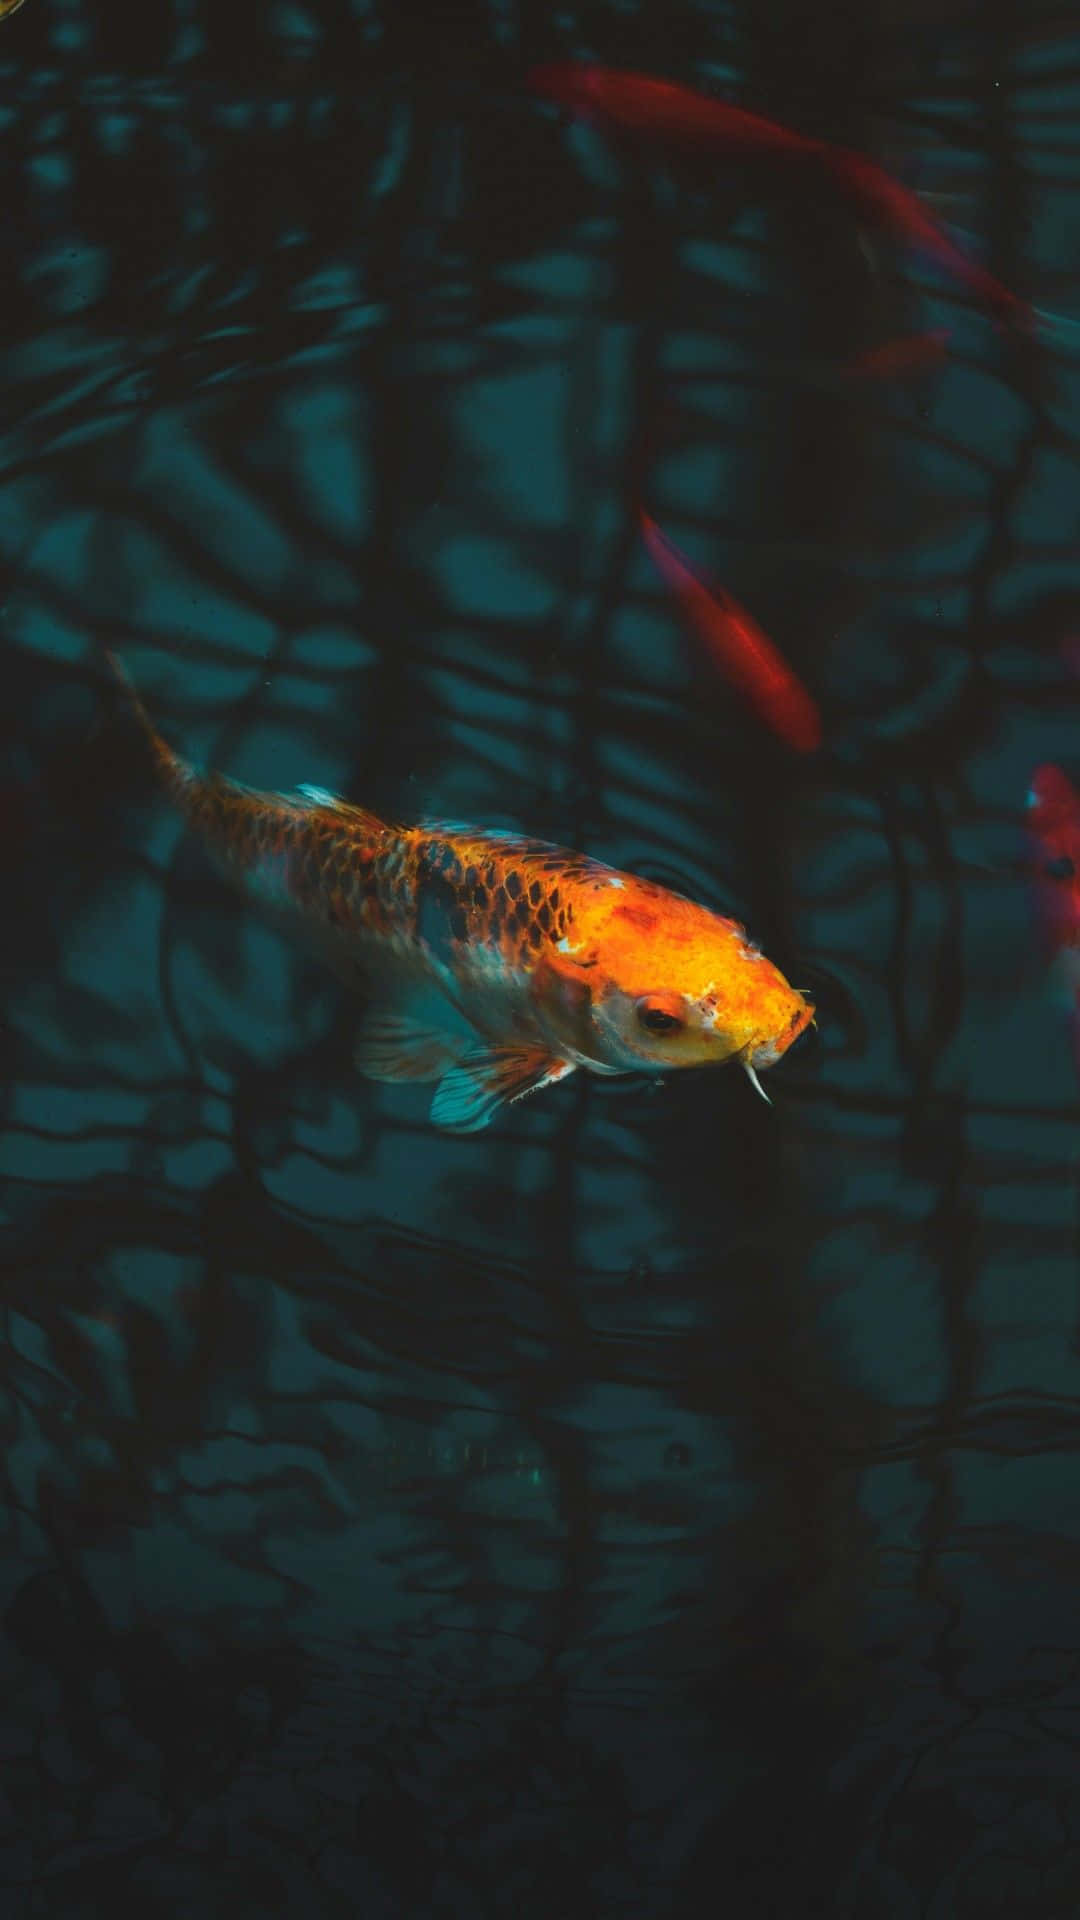 Vibrant Koi Fish Swim Gracefully in Crystal Clear Pond